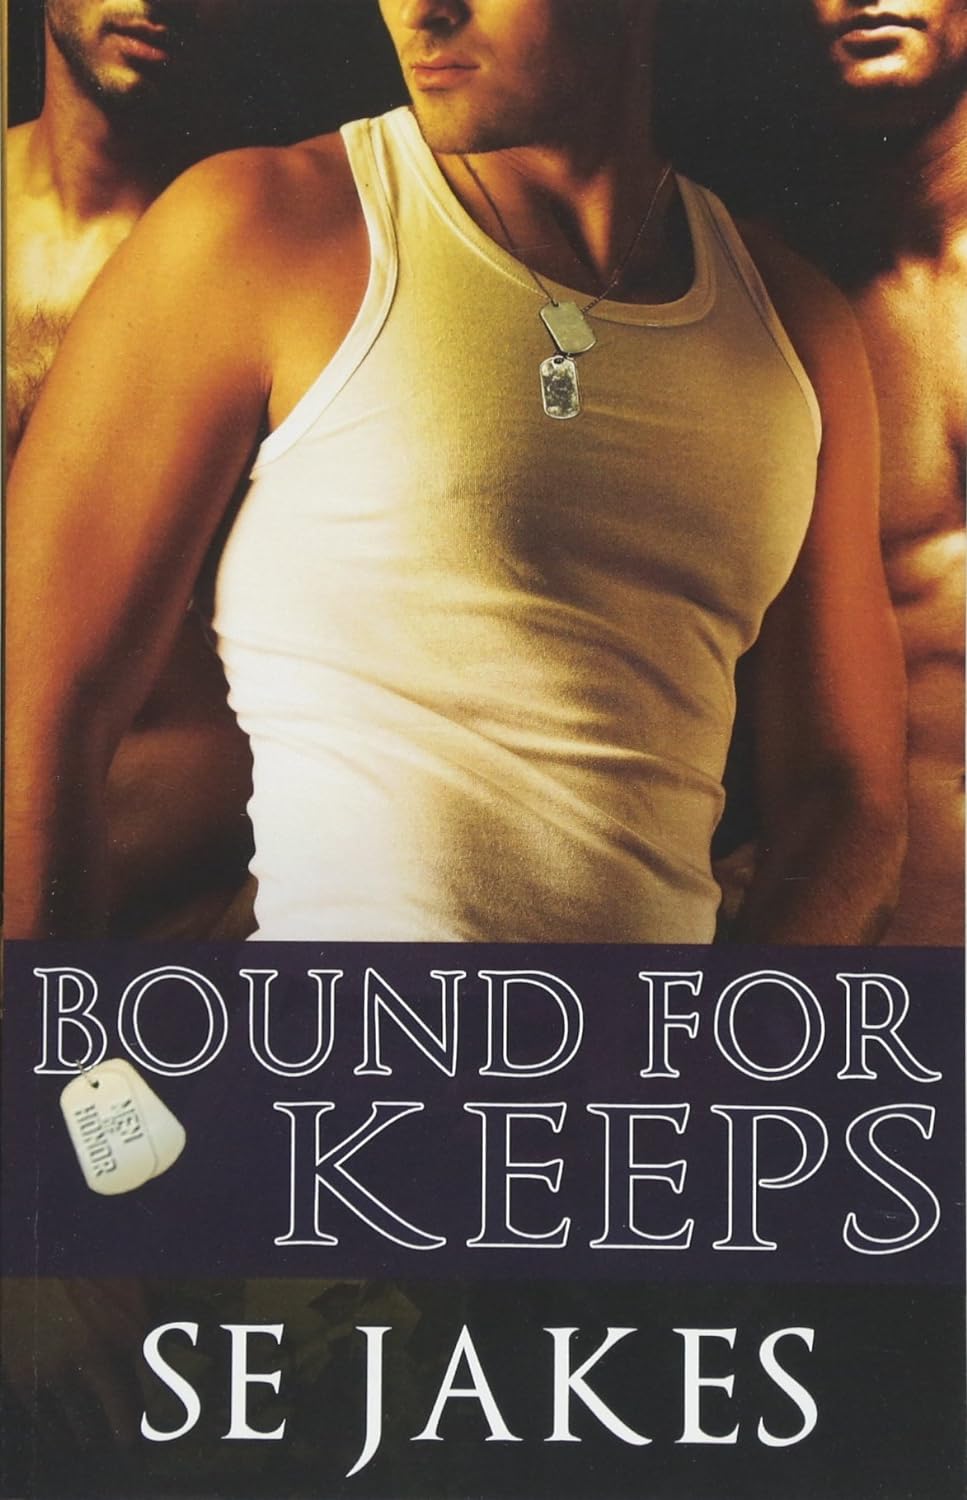 Bound for Keeps